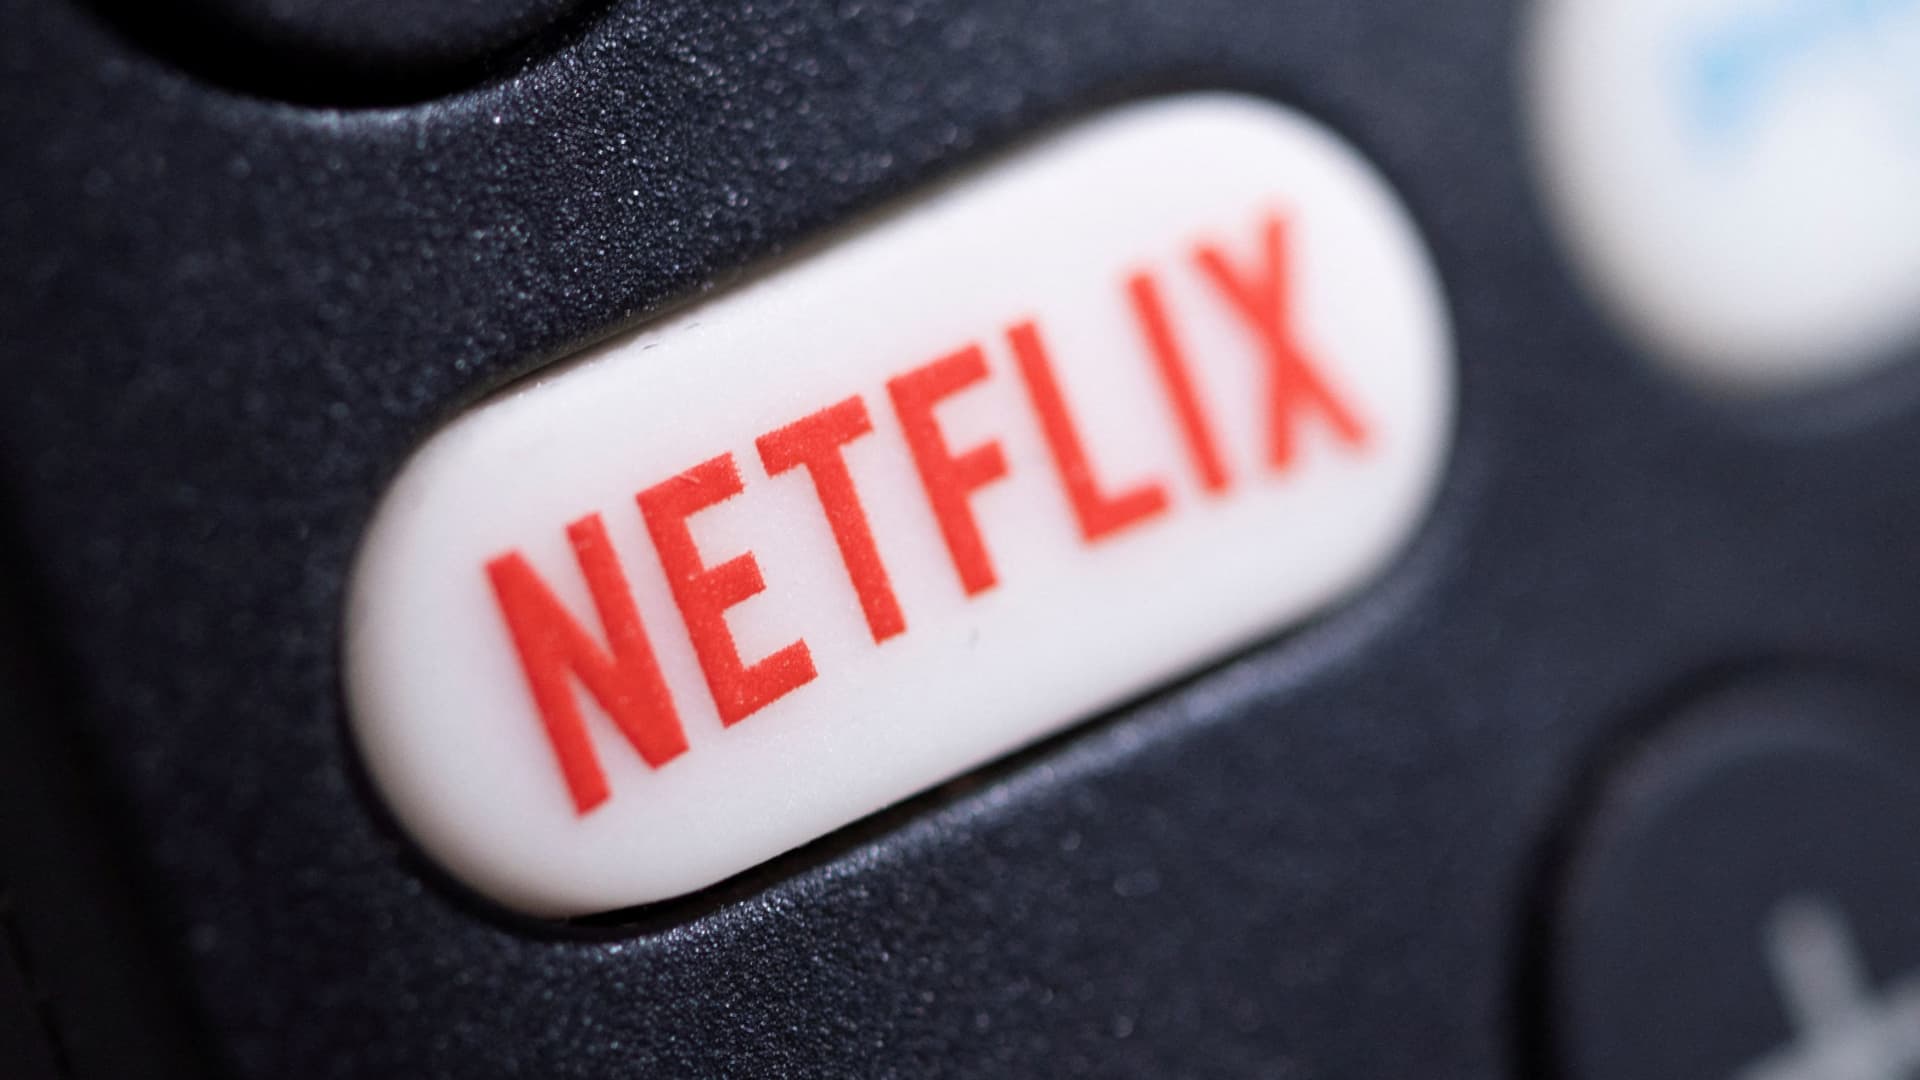 netflix-upgraded-by-long-time-bear-at-wedbush,-who-sees-new-content-reducing-churn